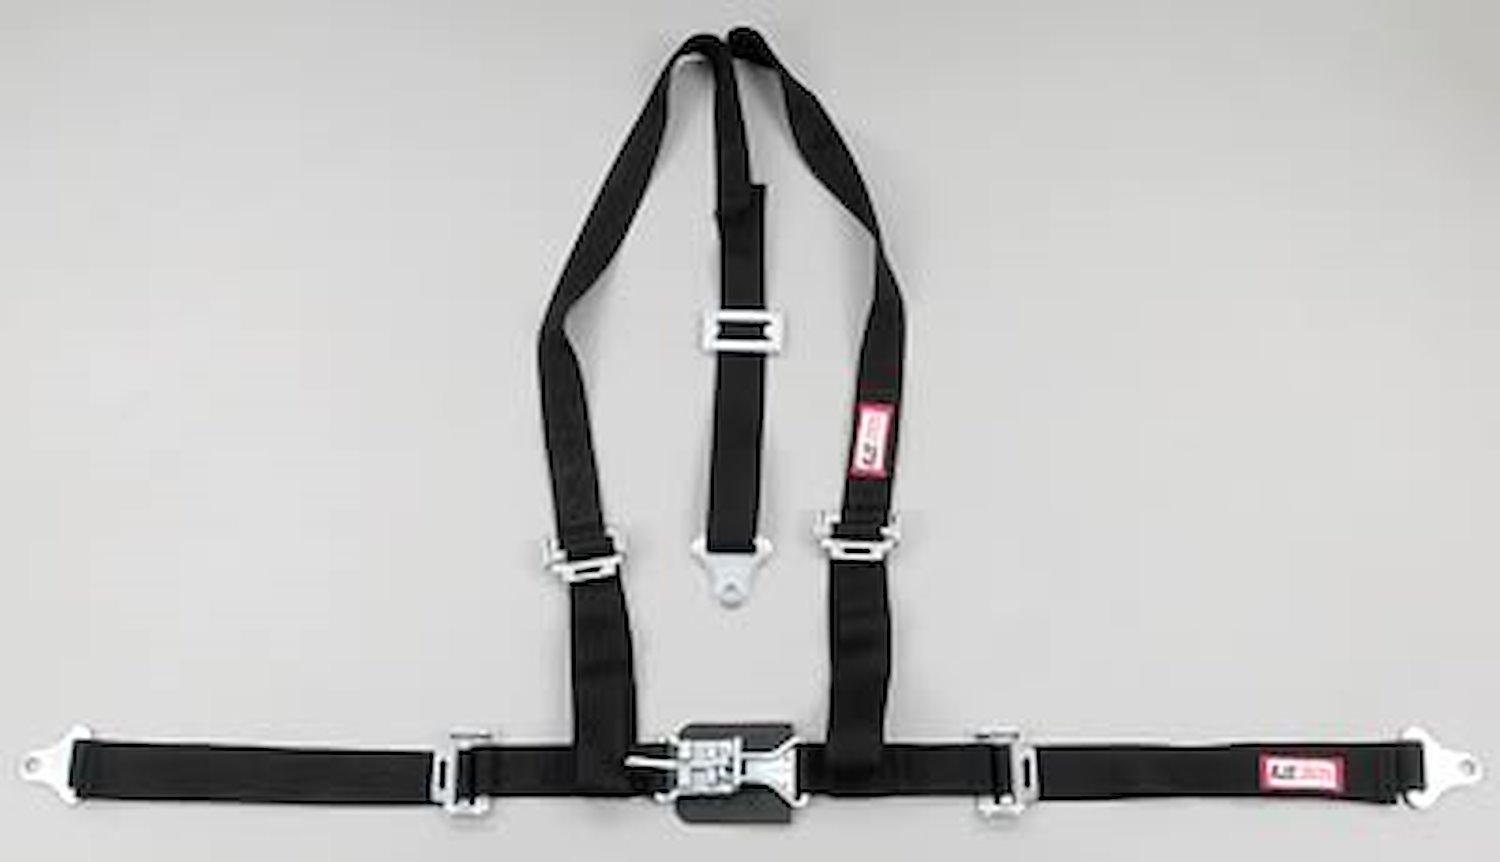 NON-SFI L&L HARNESS 2 PULL UP Lap Belt BOLT SEWN IN 2 S.H. Individual ROLL BAR Mount w/STERNUM STRAP WRAP/BOLT RED